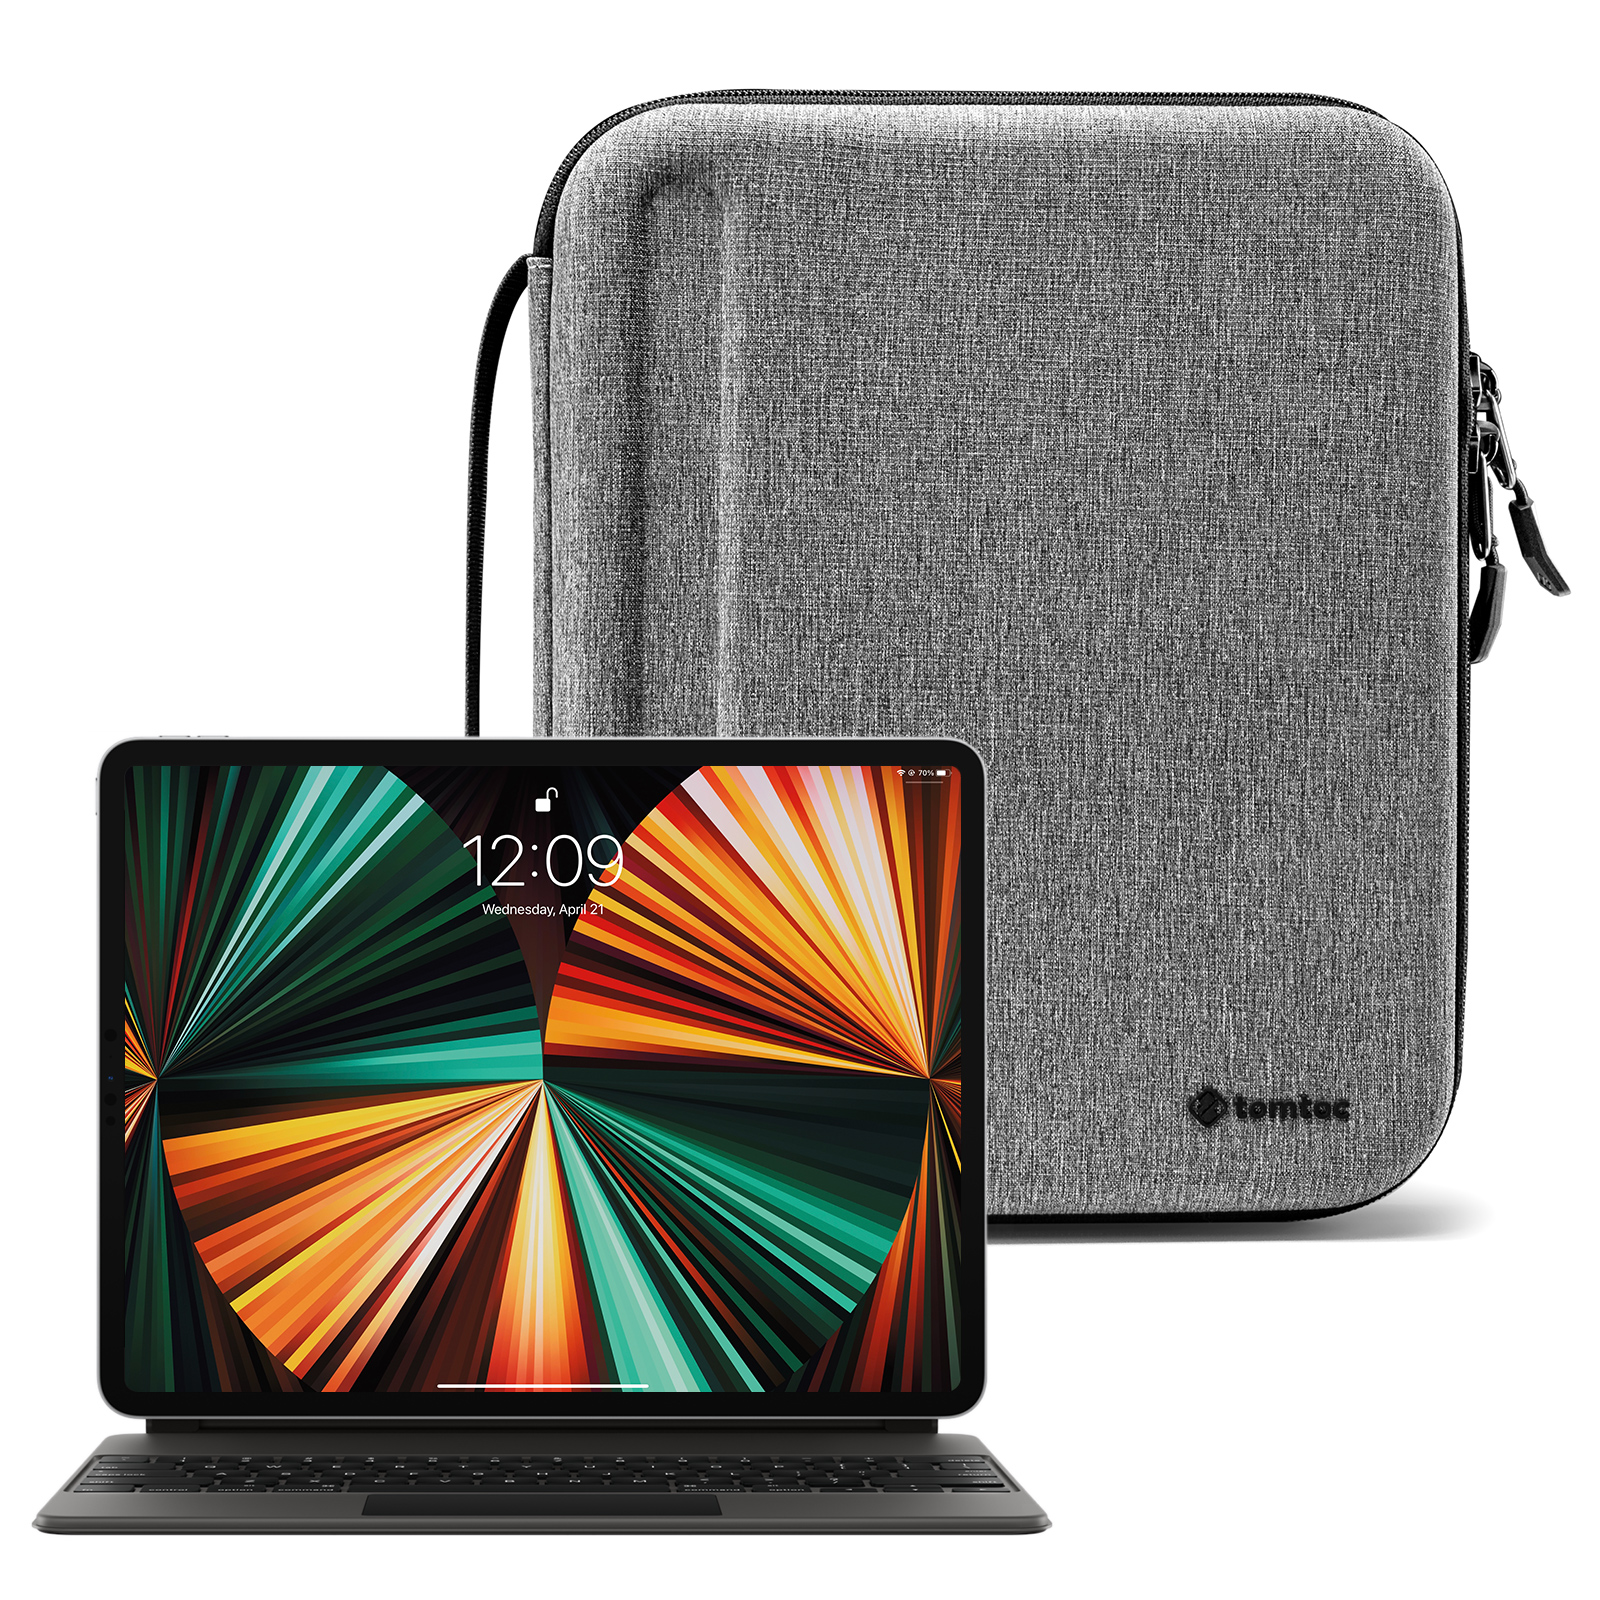  tomtoc Portfolio Case for iPad Pro 12.9-inch 2022/2021/2020,  Protective Sleeve with Accessories Pocket, Carrying Storage Bag for iPad  Pencil/Adapter/Hubs/Cables/Magic Keyboard, Fits Surface Pro 12.3 :  Electronics